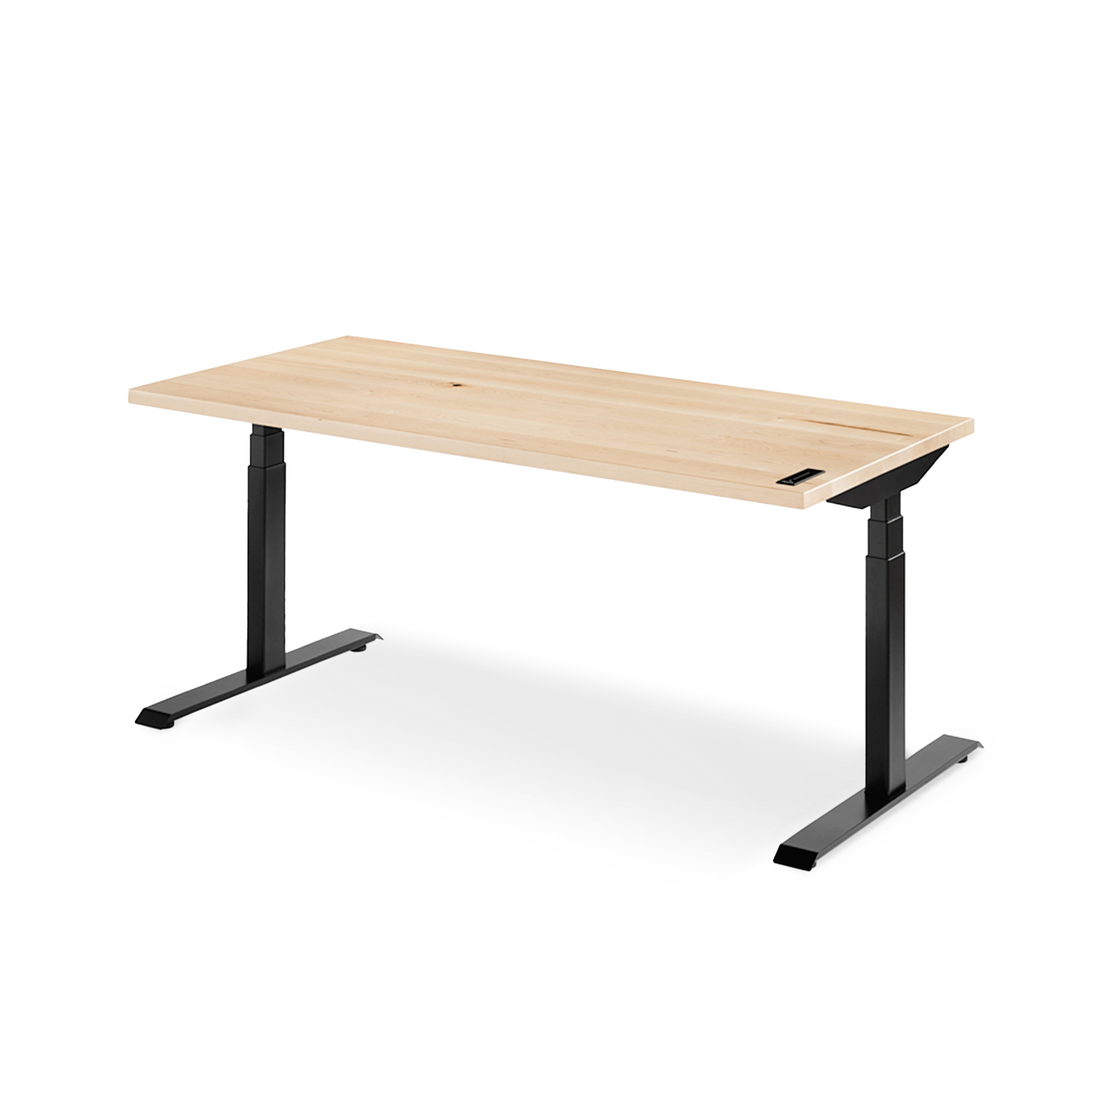 Almost Perfect Sway Desk